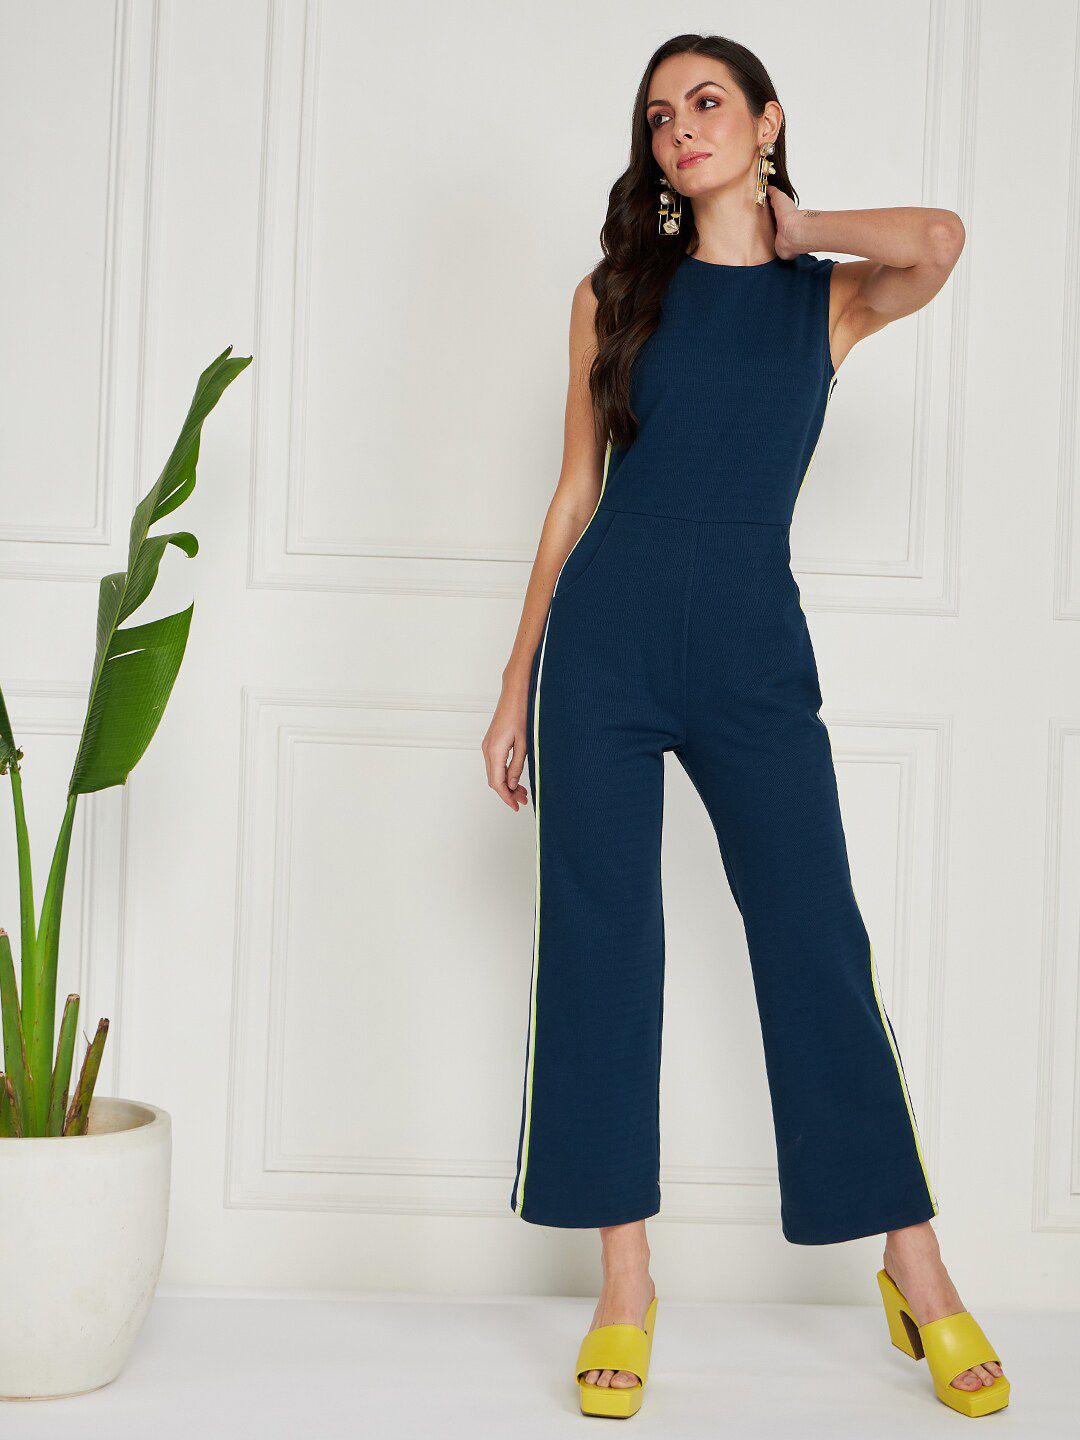 KASSUALLY Teal & White Boat Neck Basic Jumpsuit Price in India